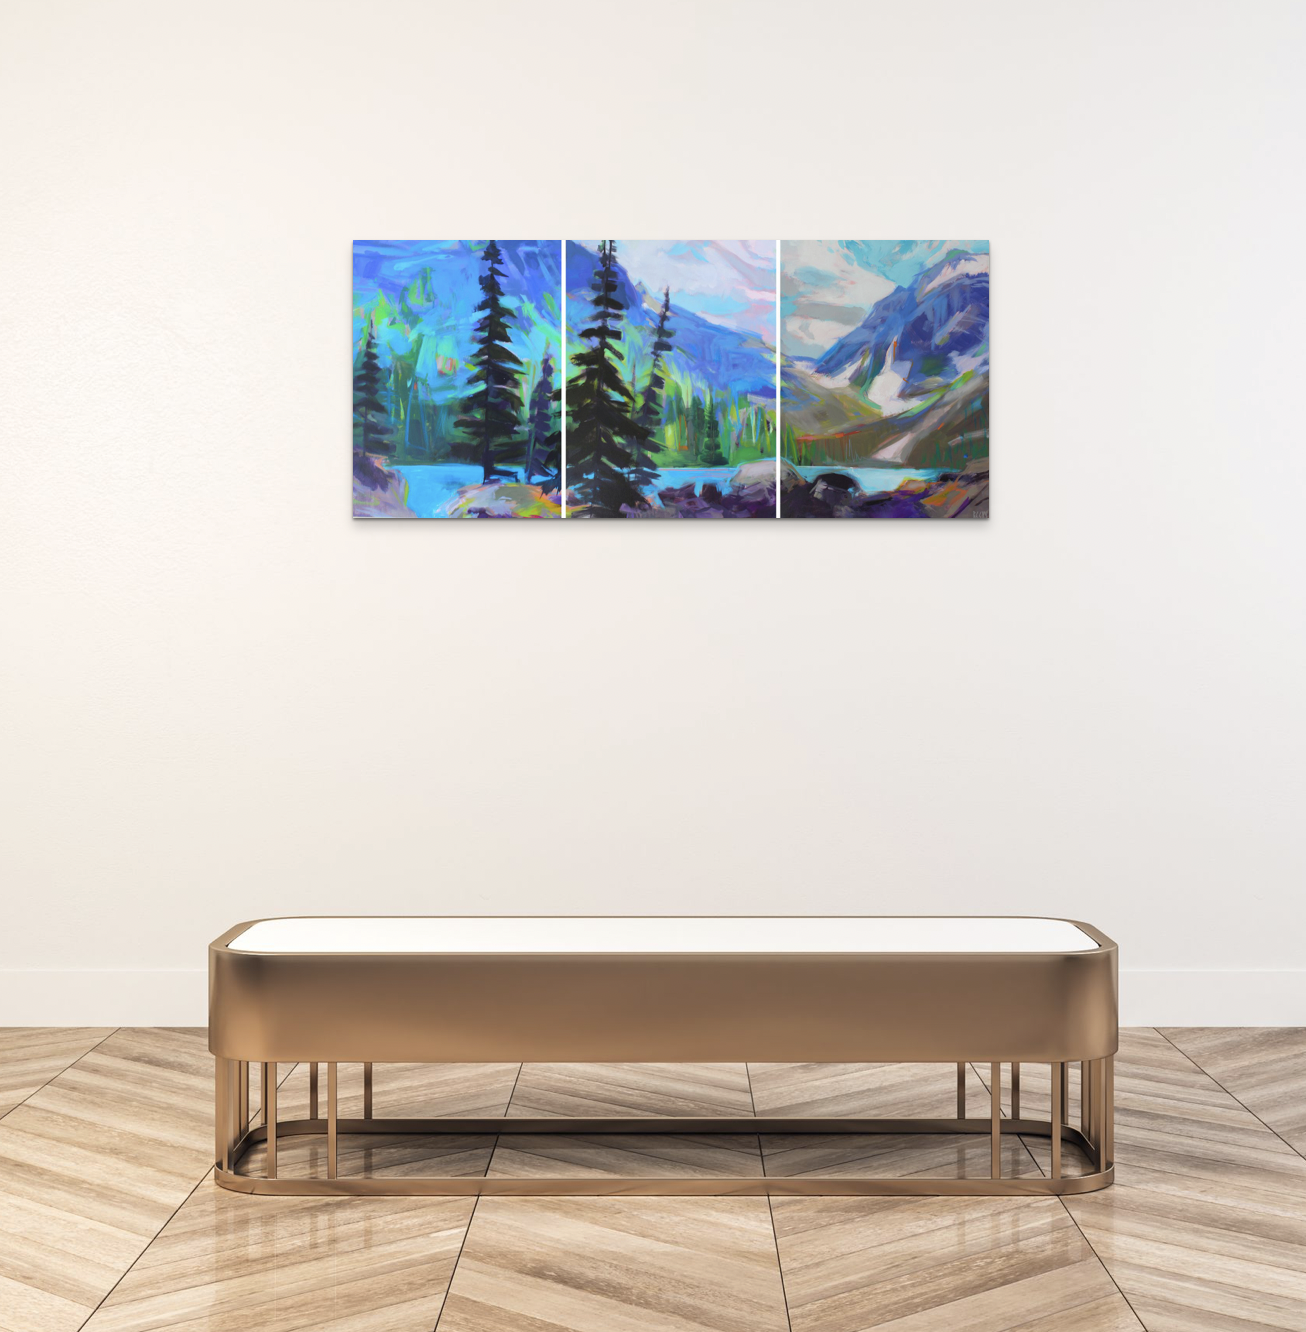 Colour Me Happy, acrylic landscape painting by Becky Holuk | Effusion Art Gallery + Cast Glass Studio, Invermere BC